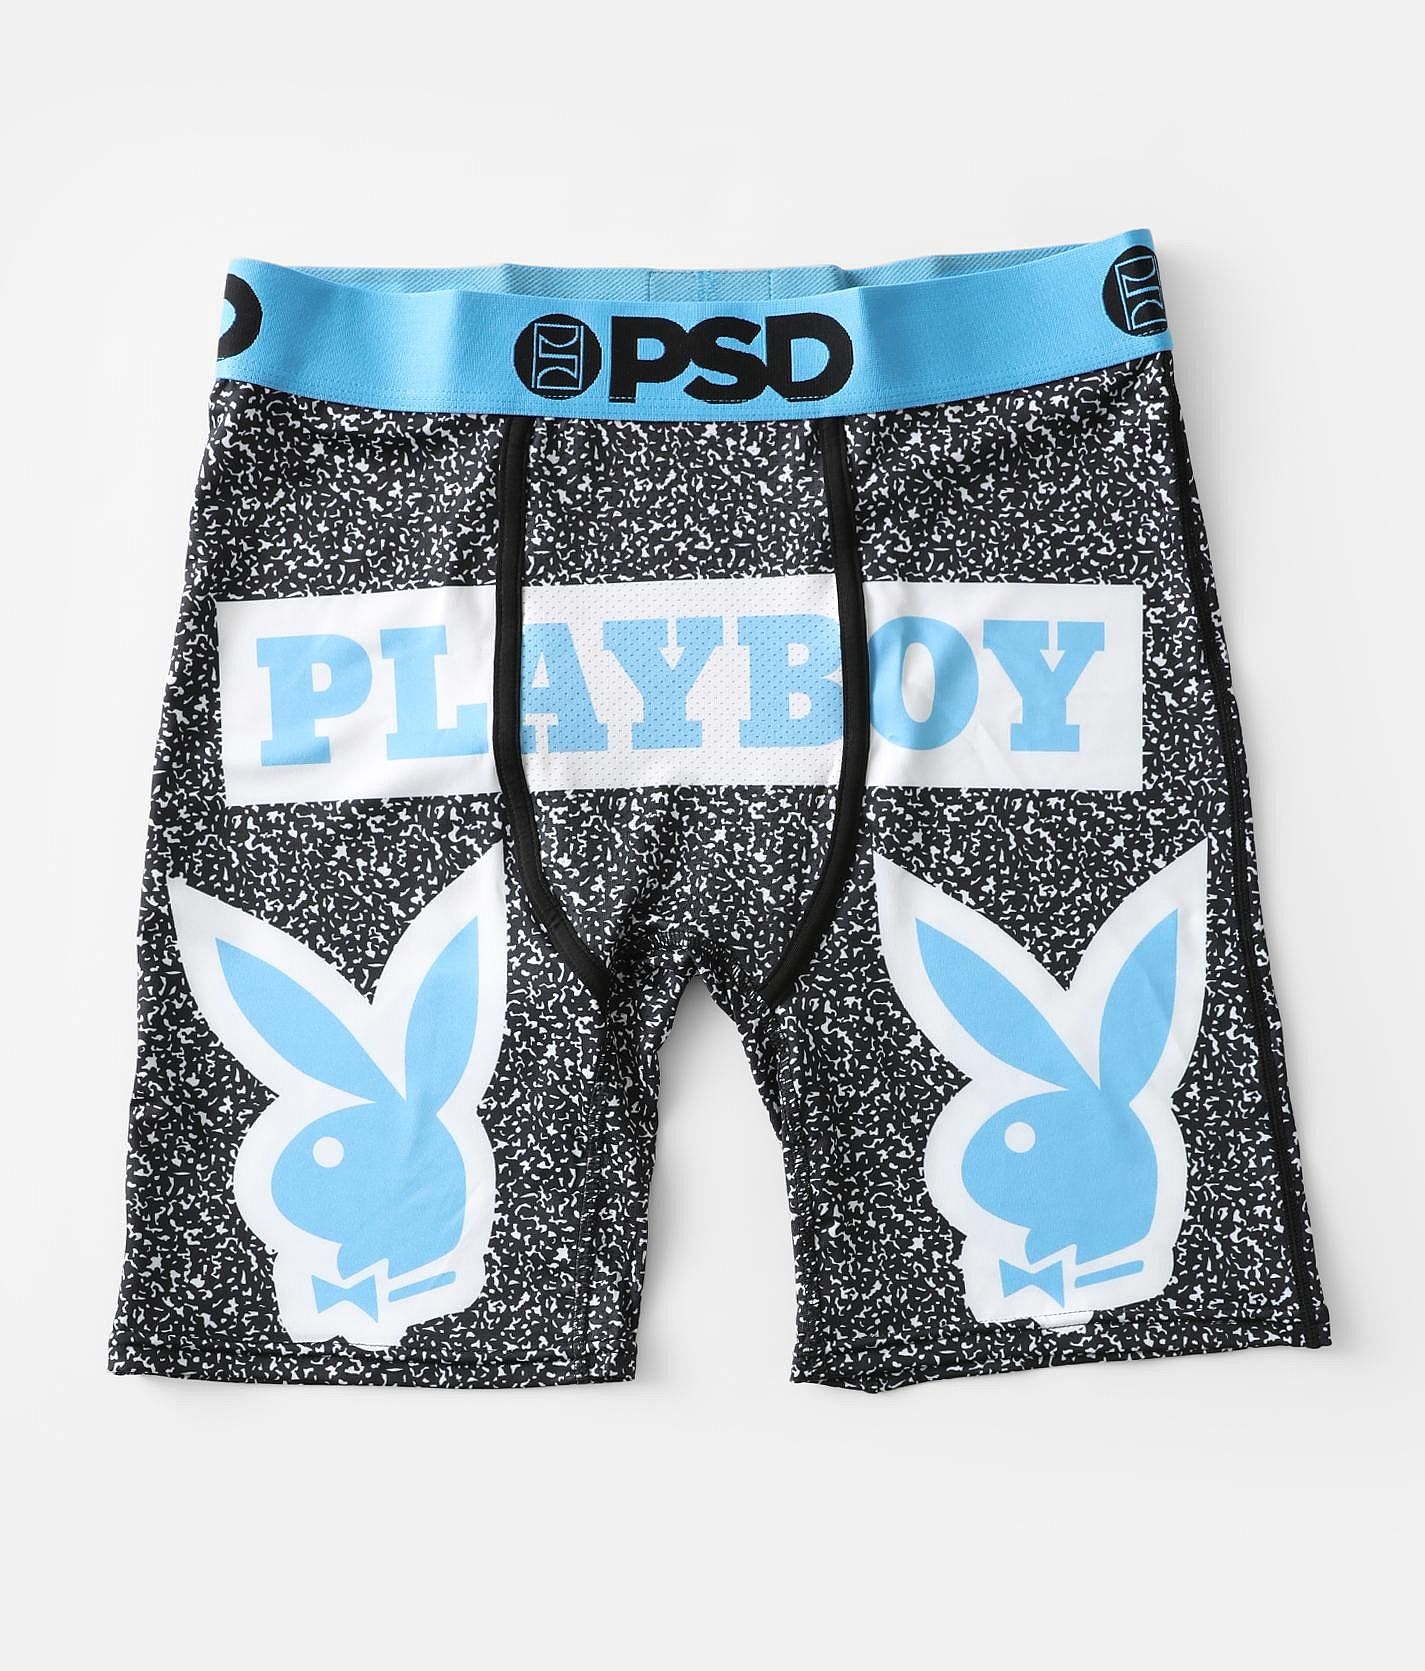 PSD Playboy Stretch Boxer Briefs - Men's Boxers in Black